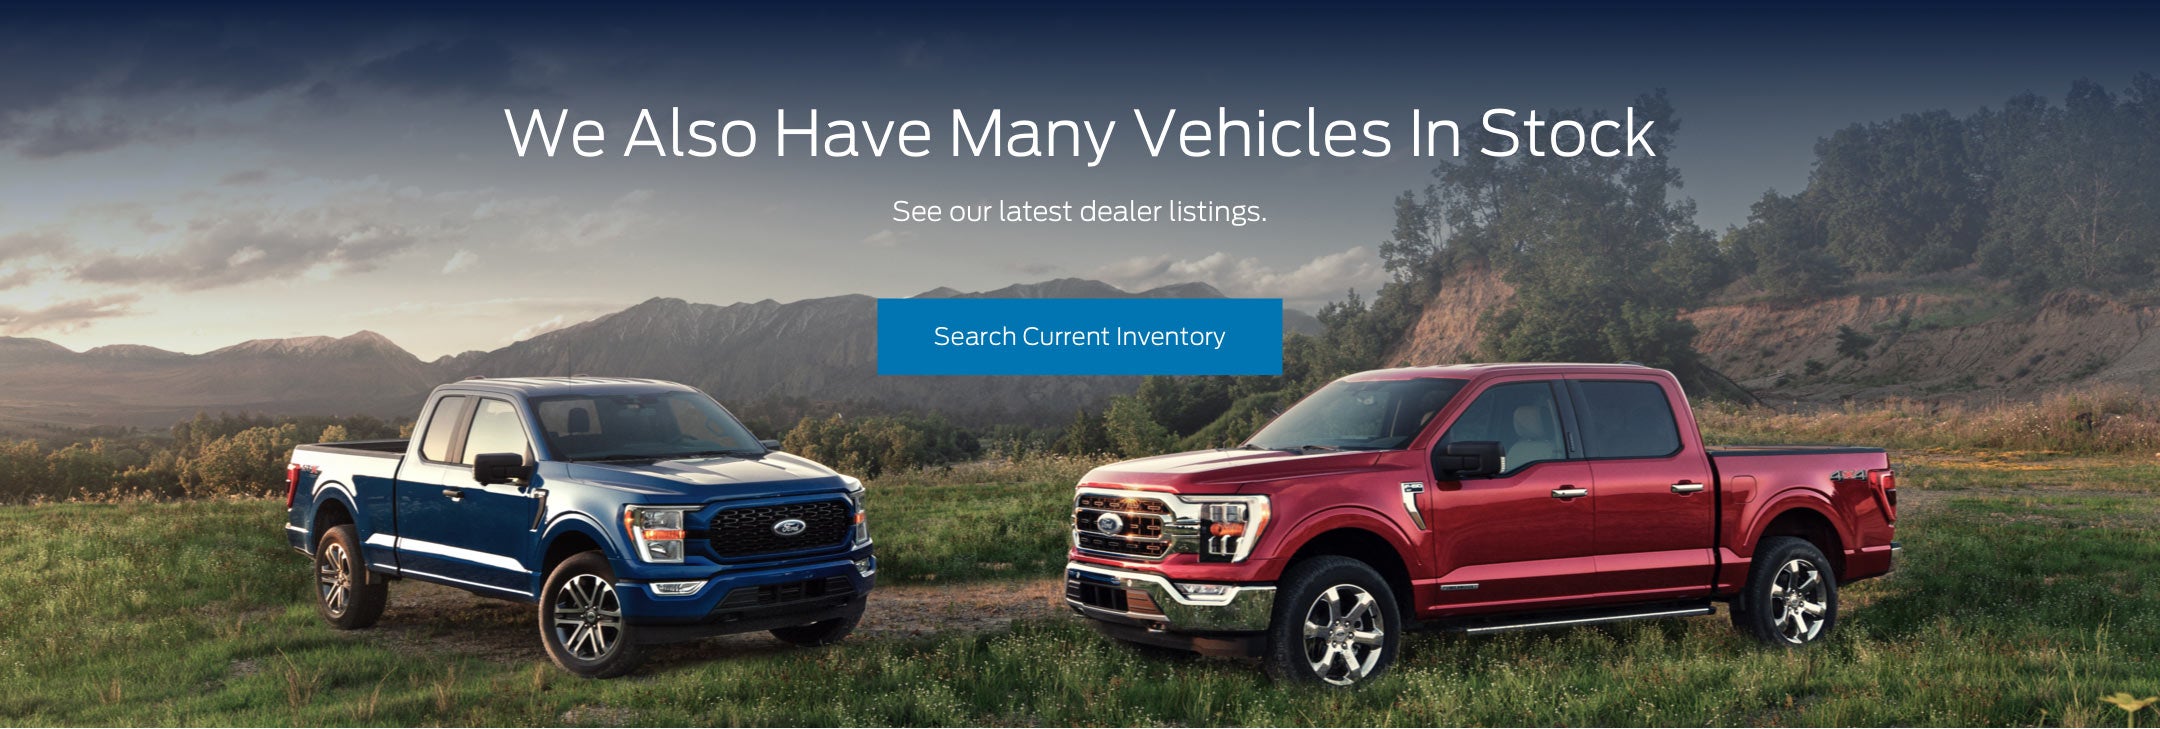 Ford vehicles in stock | Tindol Ford in Gastonia NC